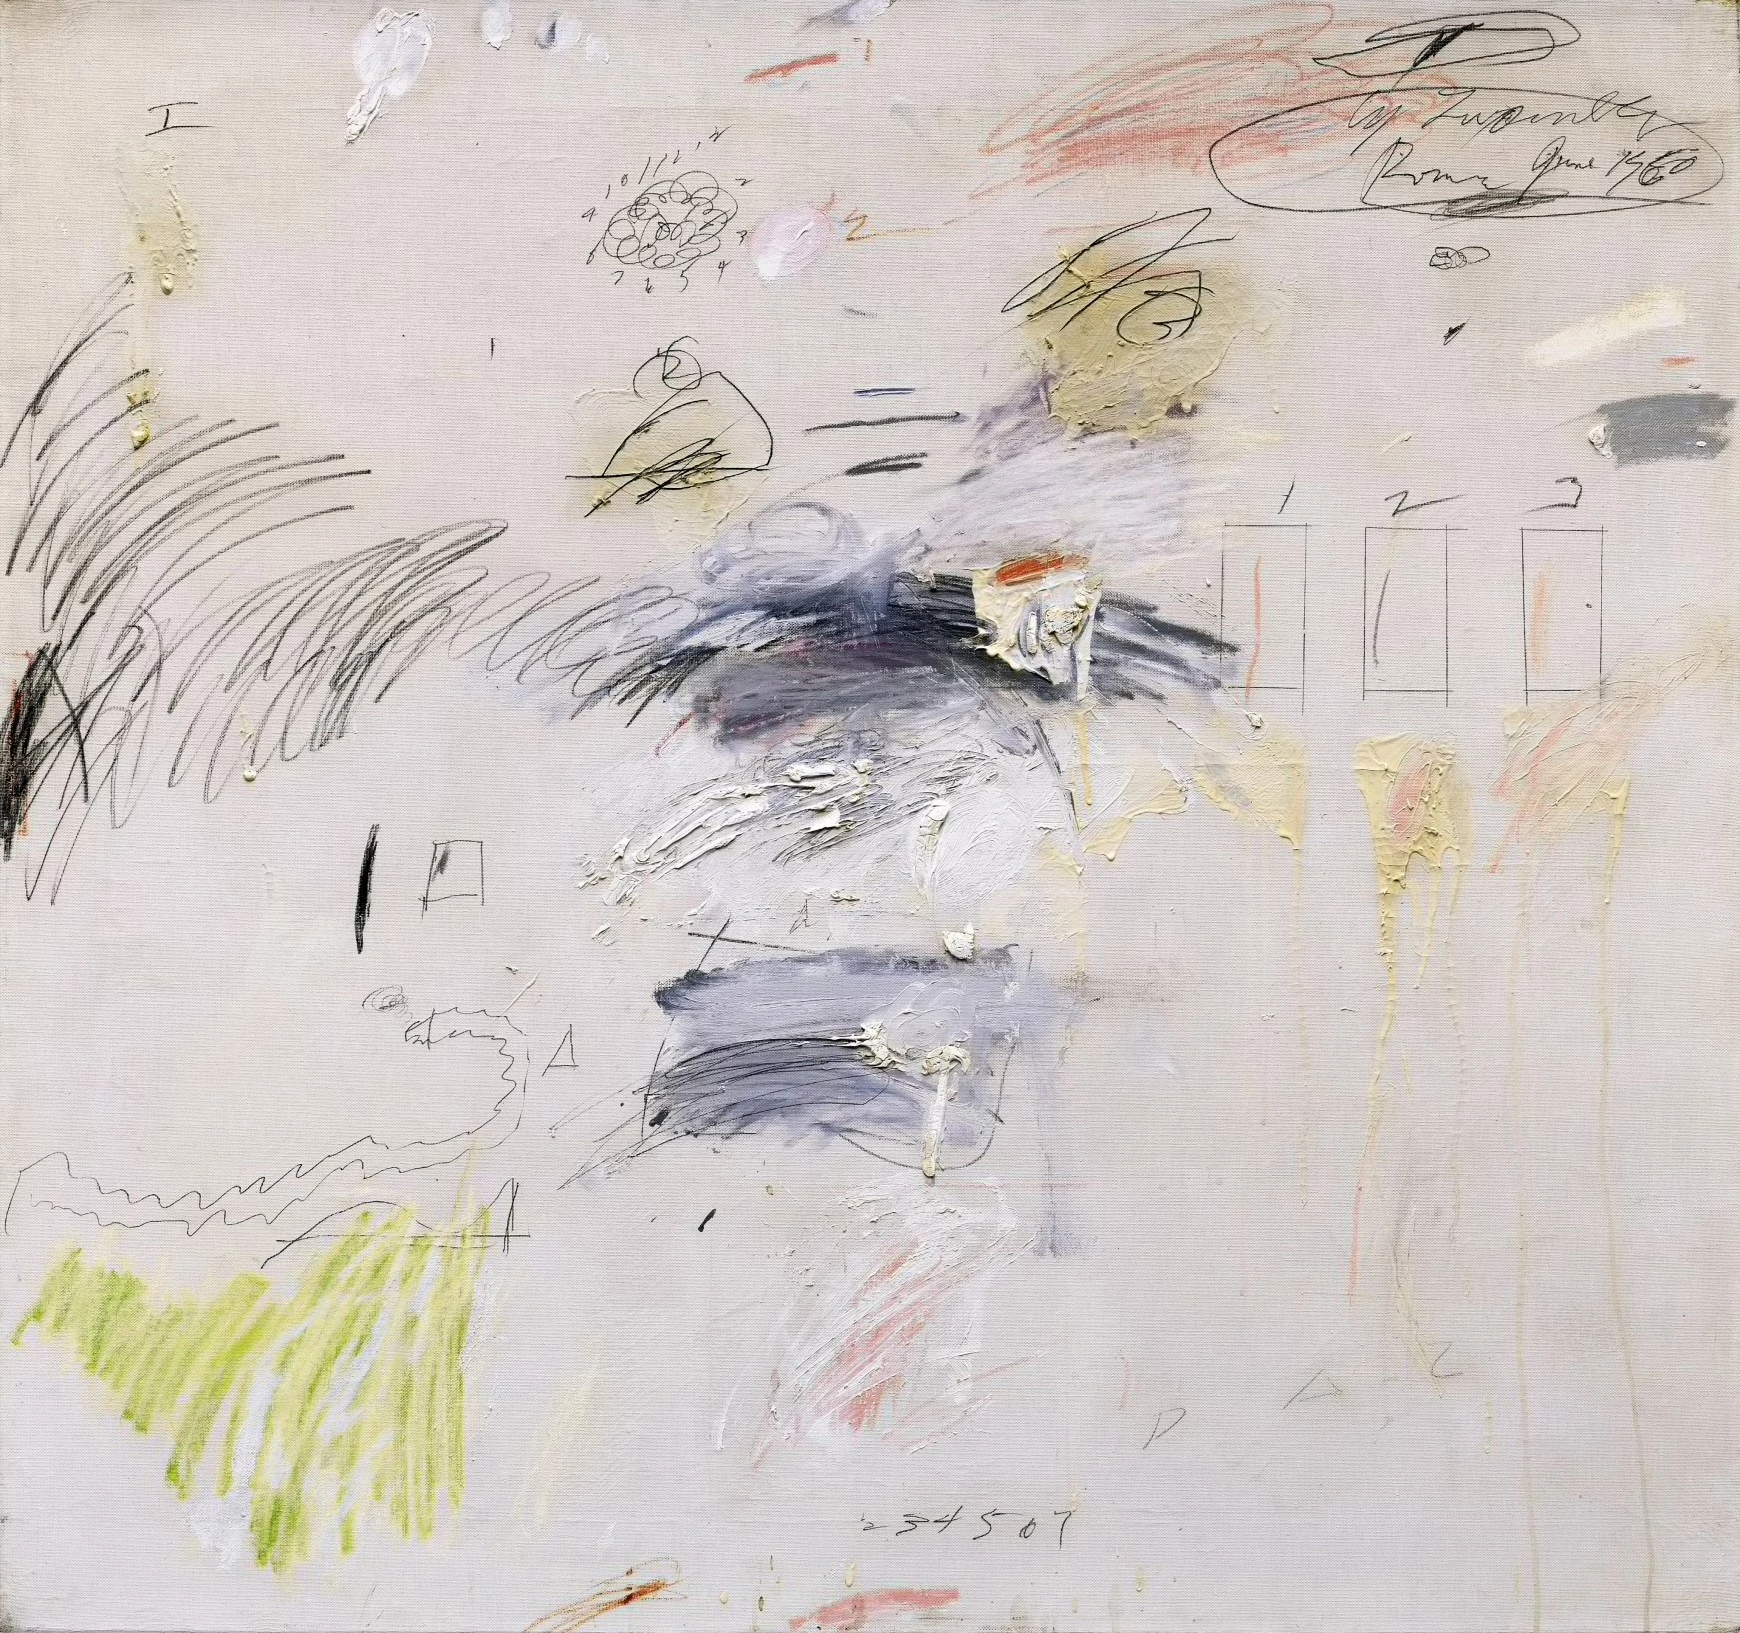 Cy Twombly, The Artists